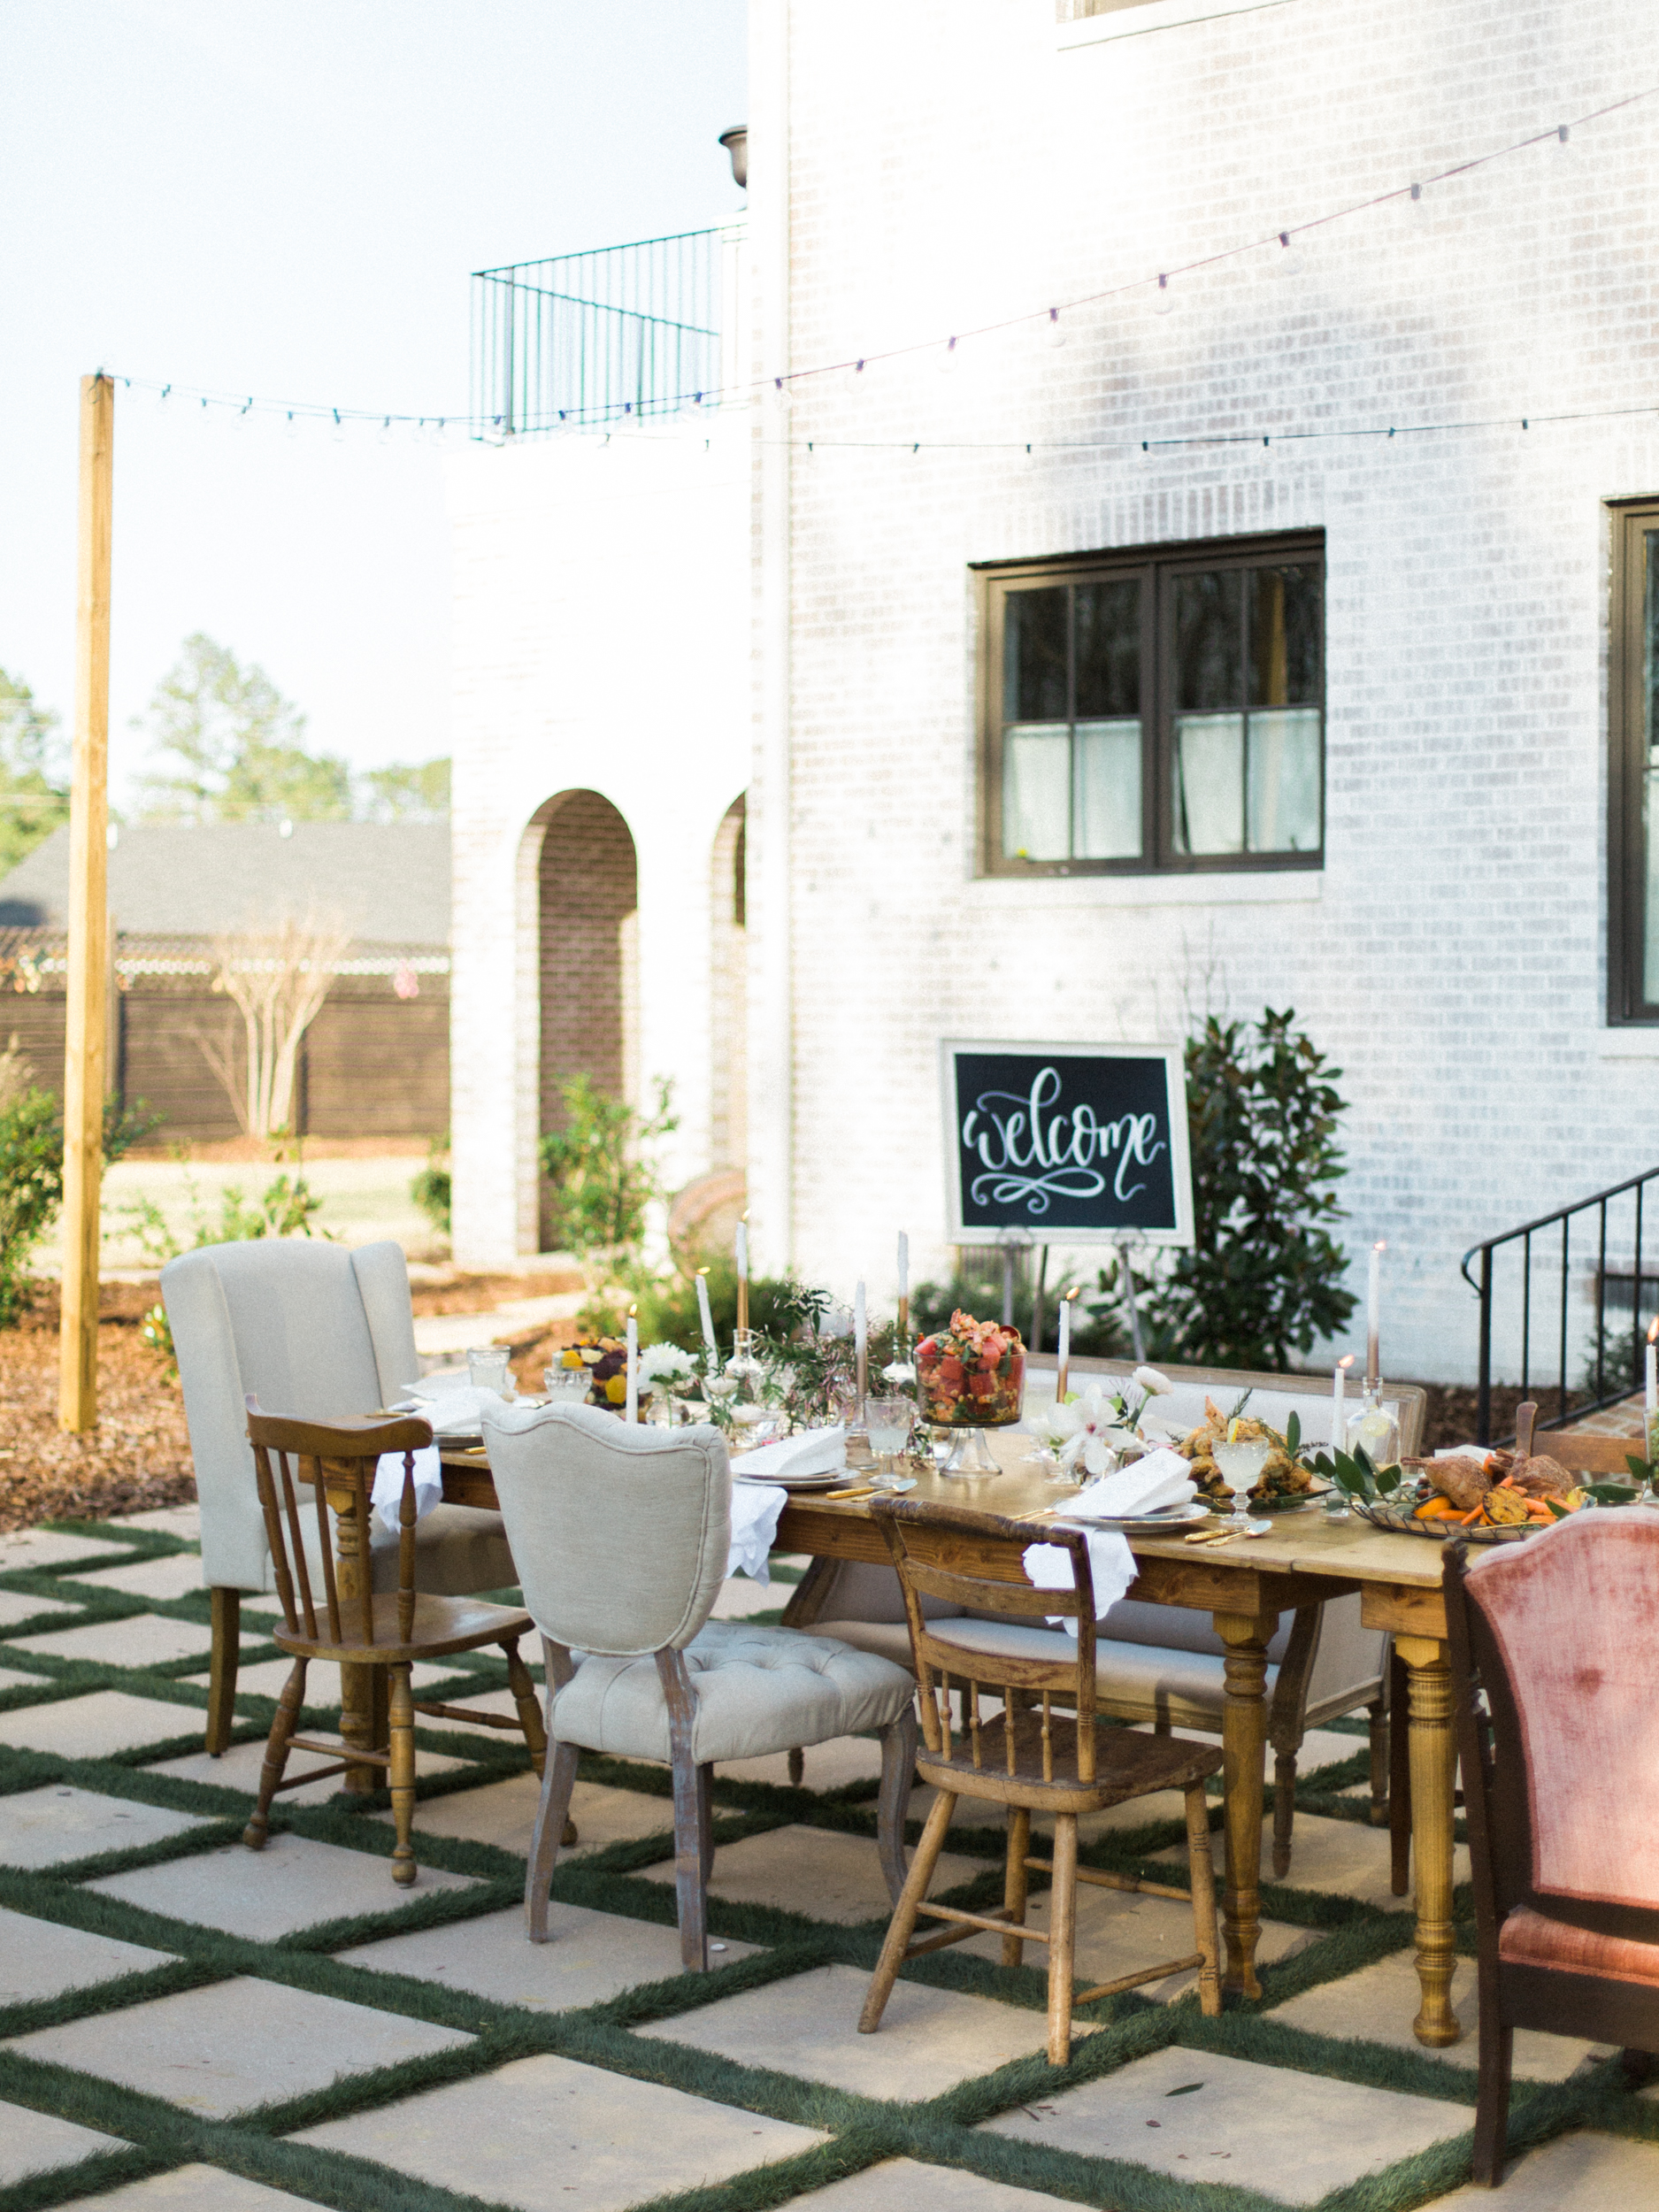 How to Throw a Memorable Outdoor Styled Southern Dinner Party that everyone will love - Behind-the-Scenes of a Styled Shoot #dinnerparty #southerndinnerparty #styledshoot #dinner | glitterinc.com | @glitterinc